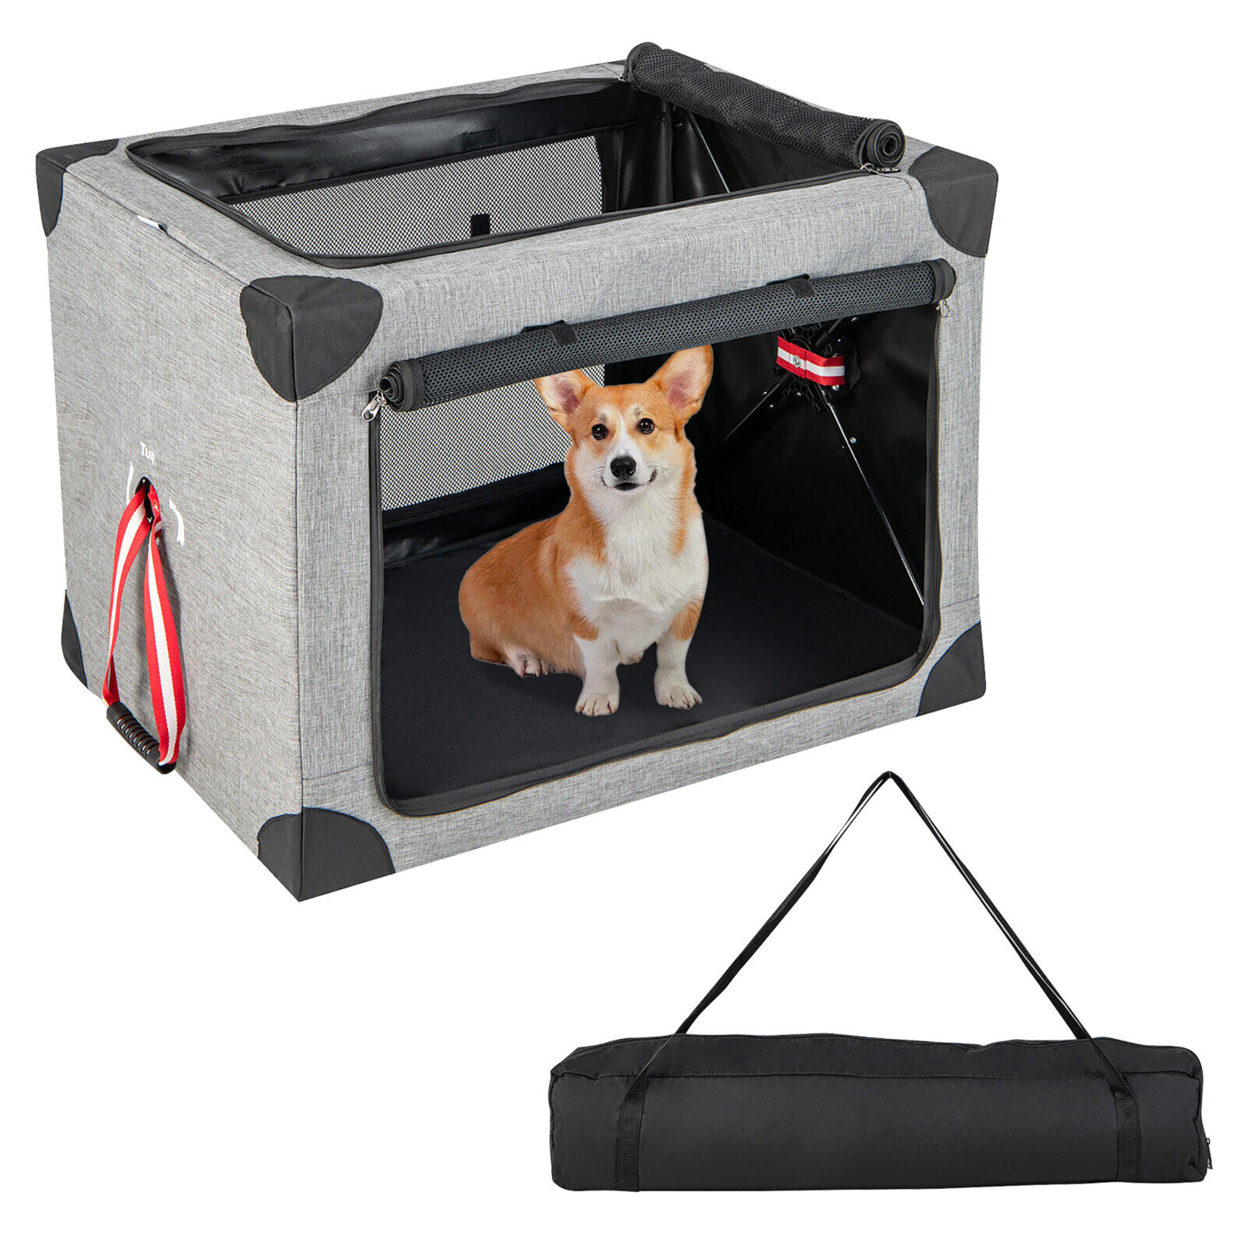 26/32/37 In Portable Folding Dog Crate W/ Mesh Mat & Locking Zippers For Cat Carrier Use - XL